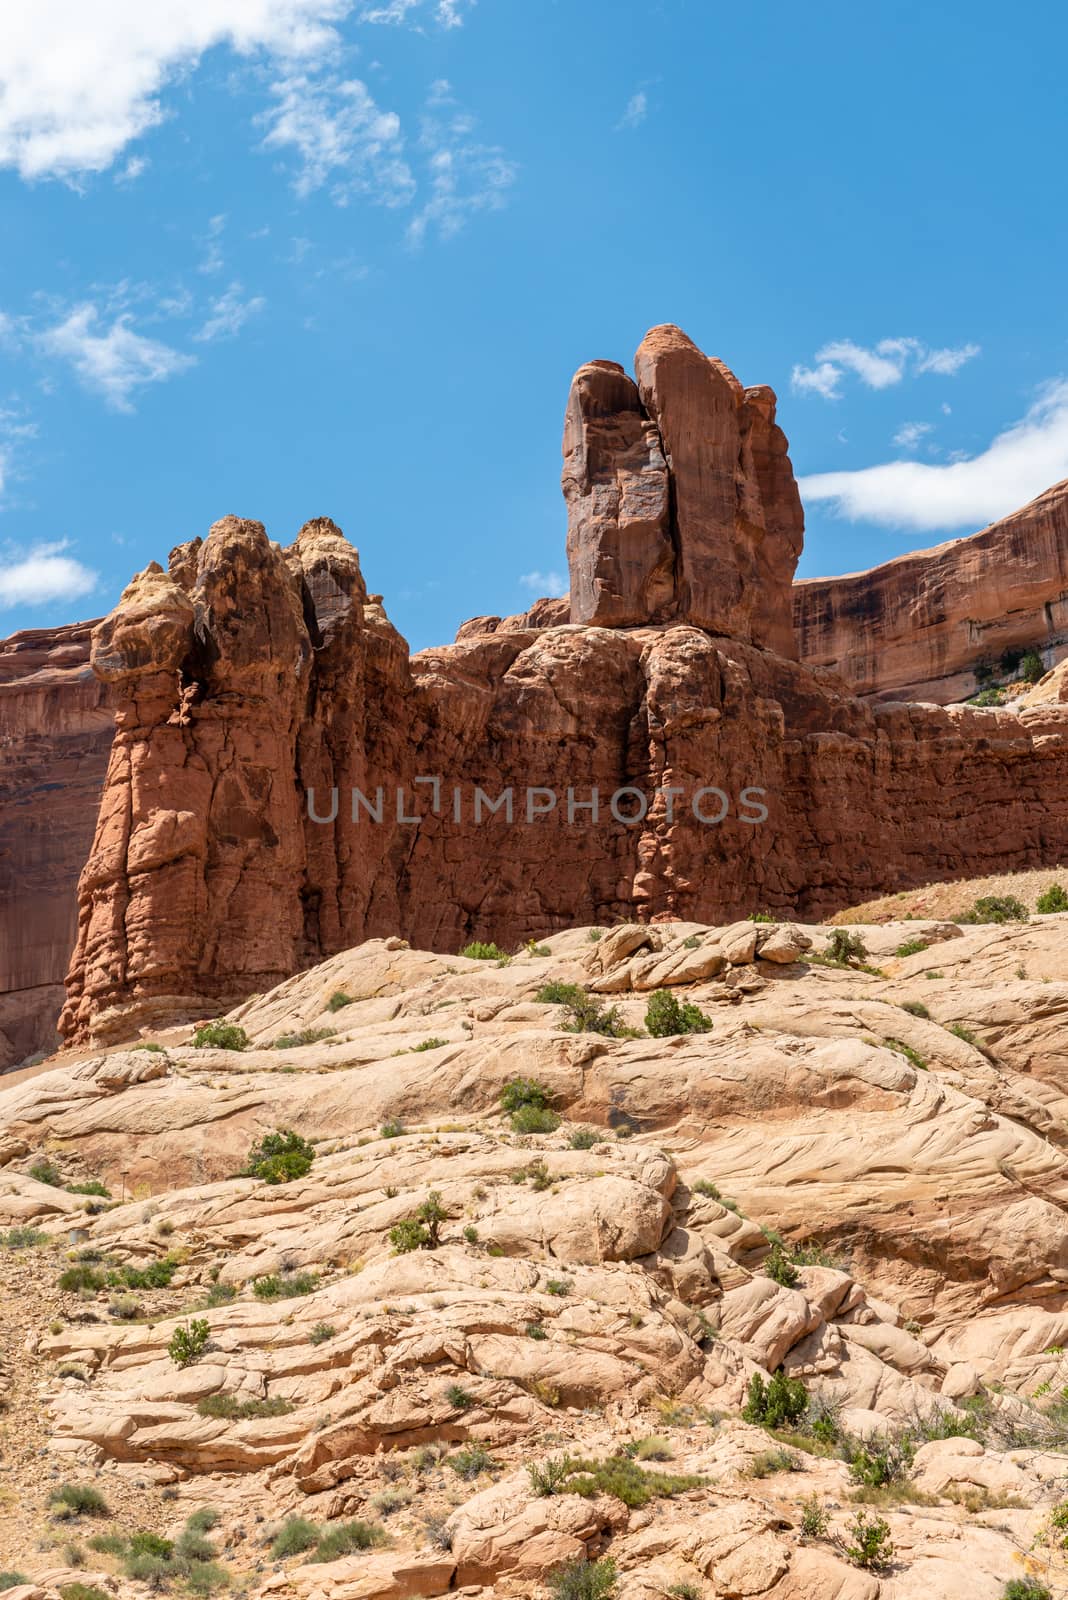 Sandstone formations at the entrance of Arches National Park, Utah